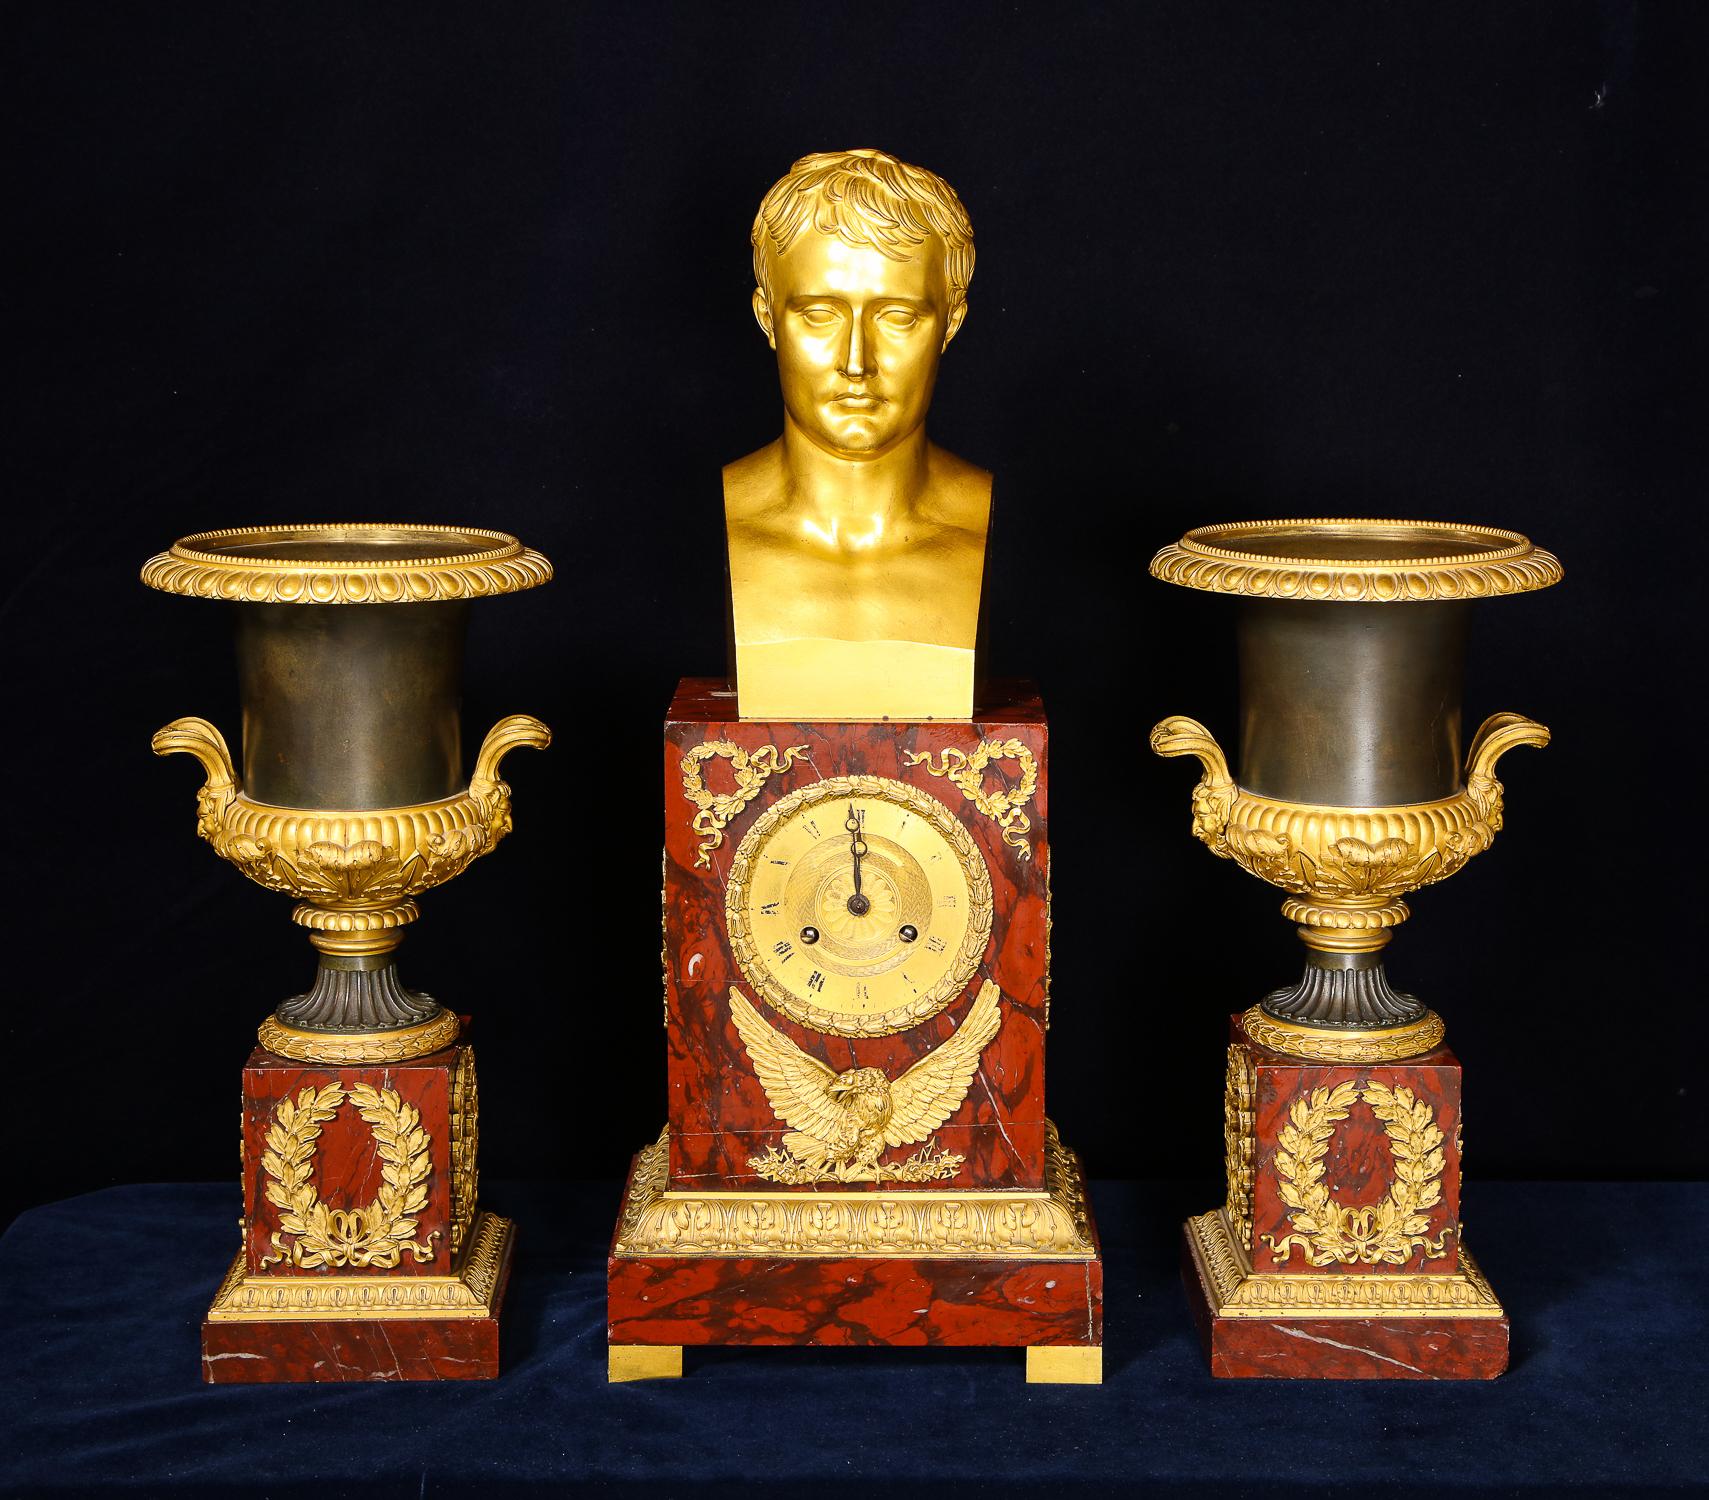 A superb antique French Empire gilt bronze, patinated bronze and carved rouge marble three piece figural clock garniture set of exquisite craftsmanship. The unique clock is embellished with a fine gilt bronze bust of Napoleon on a rouge marble base